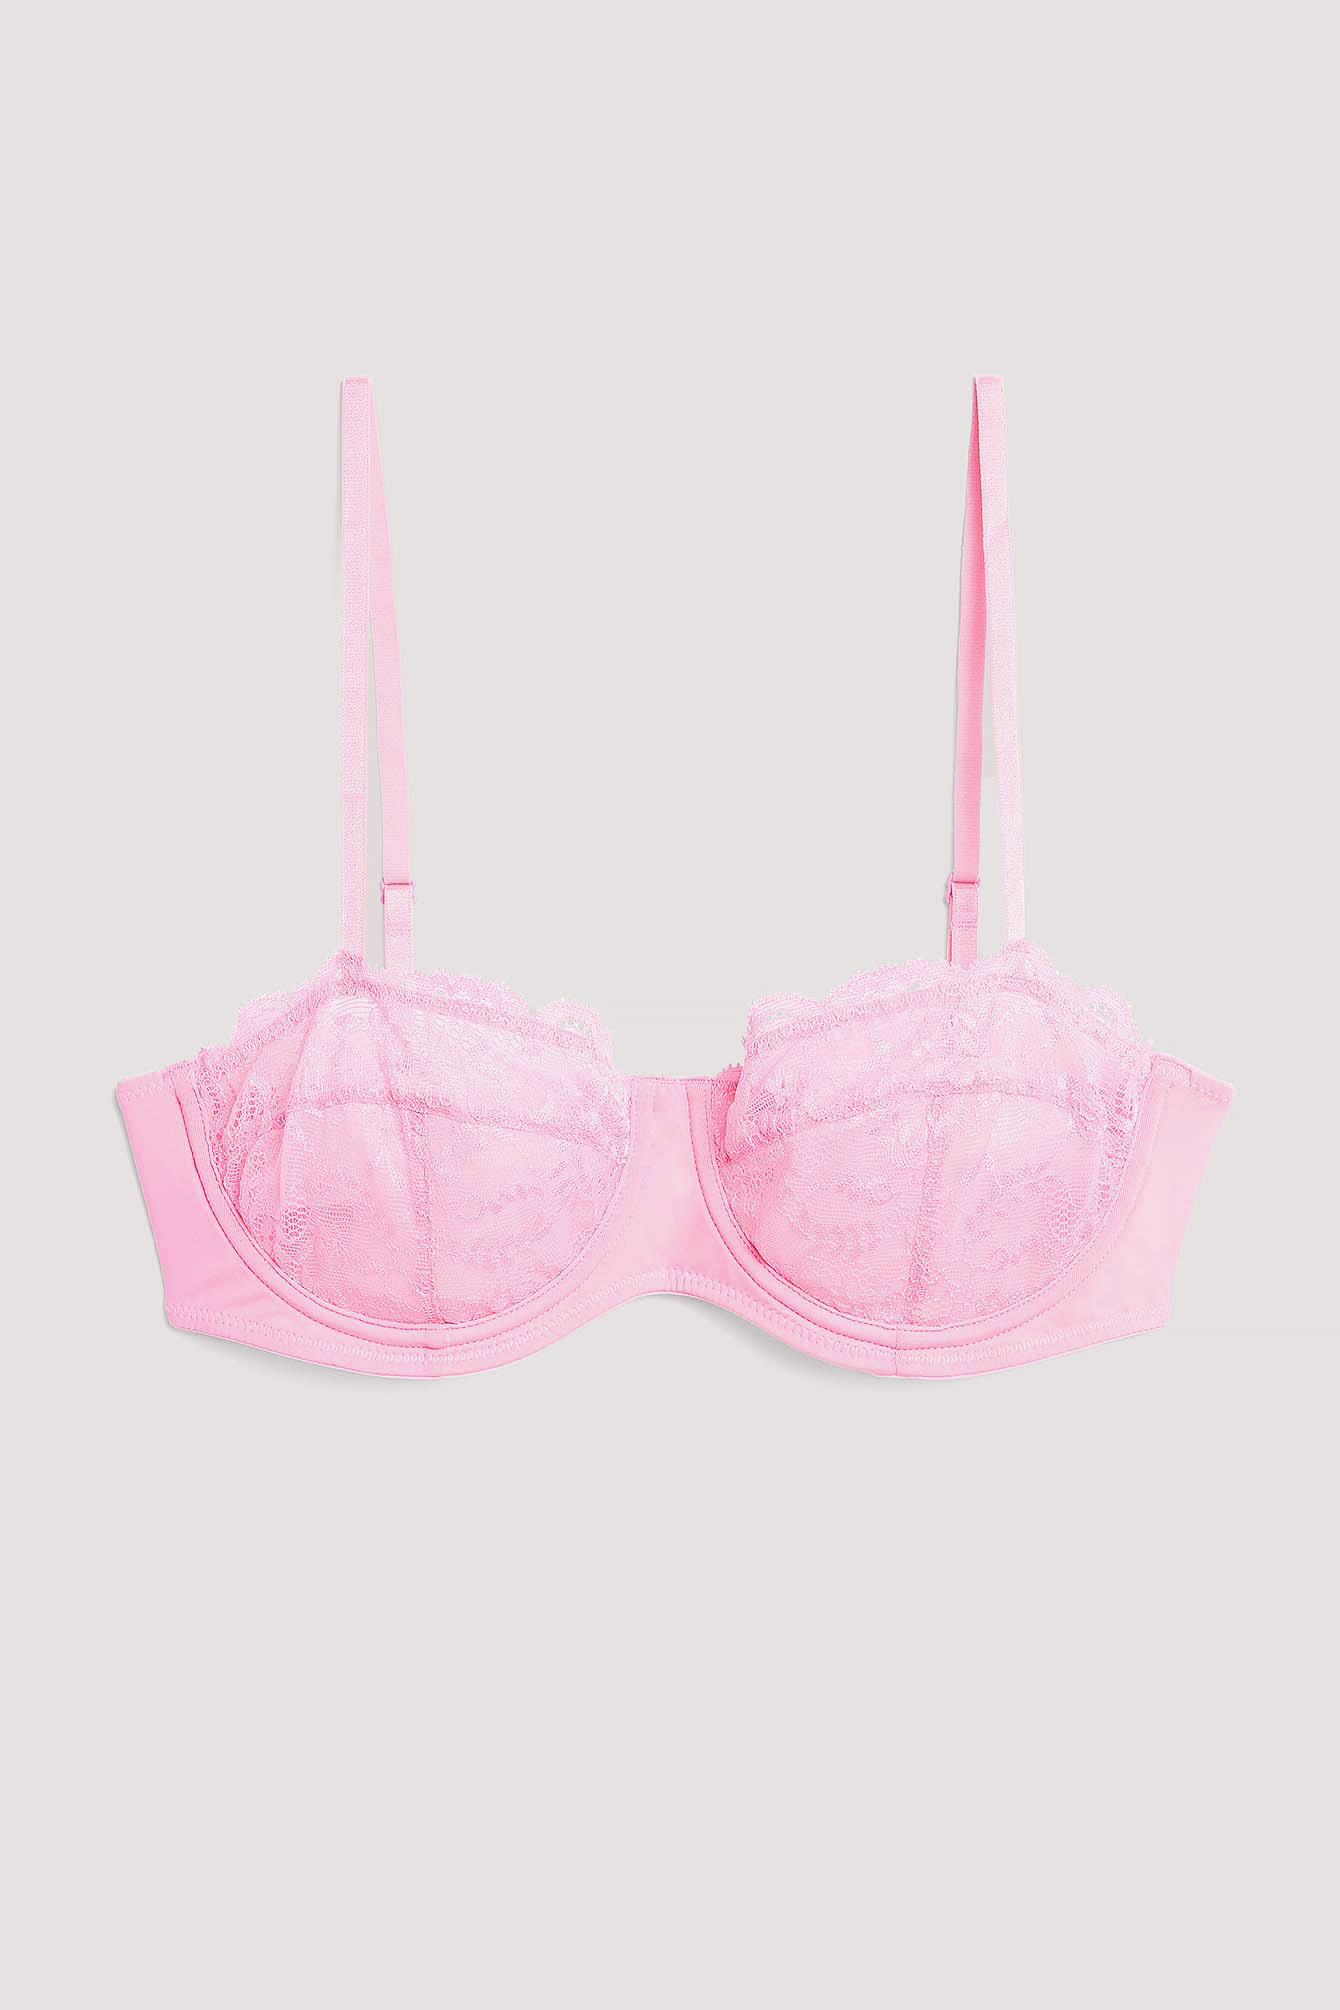 Womens Pink Lace Bras